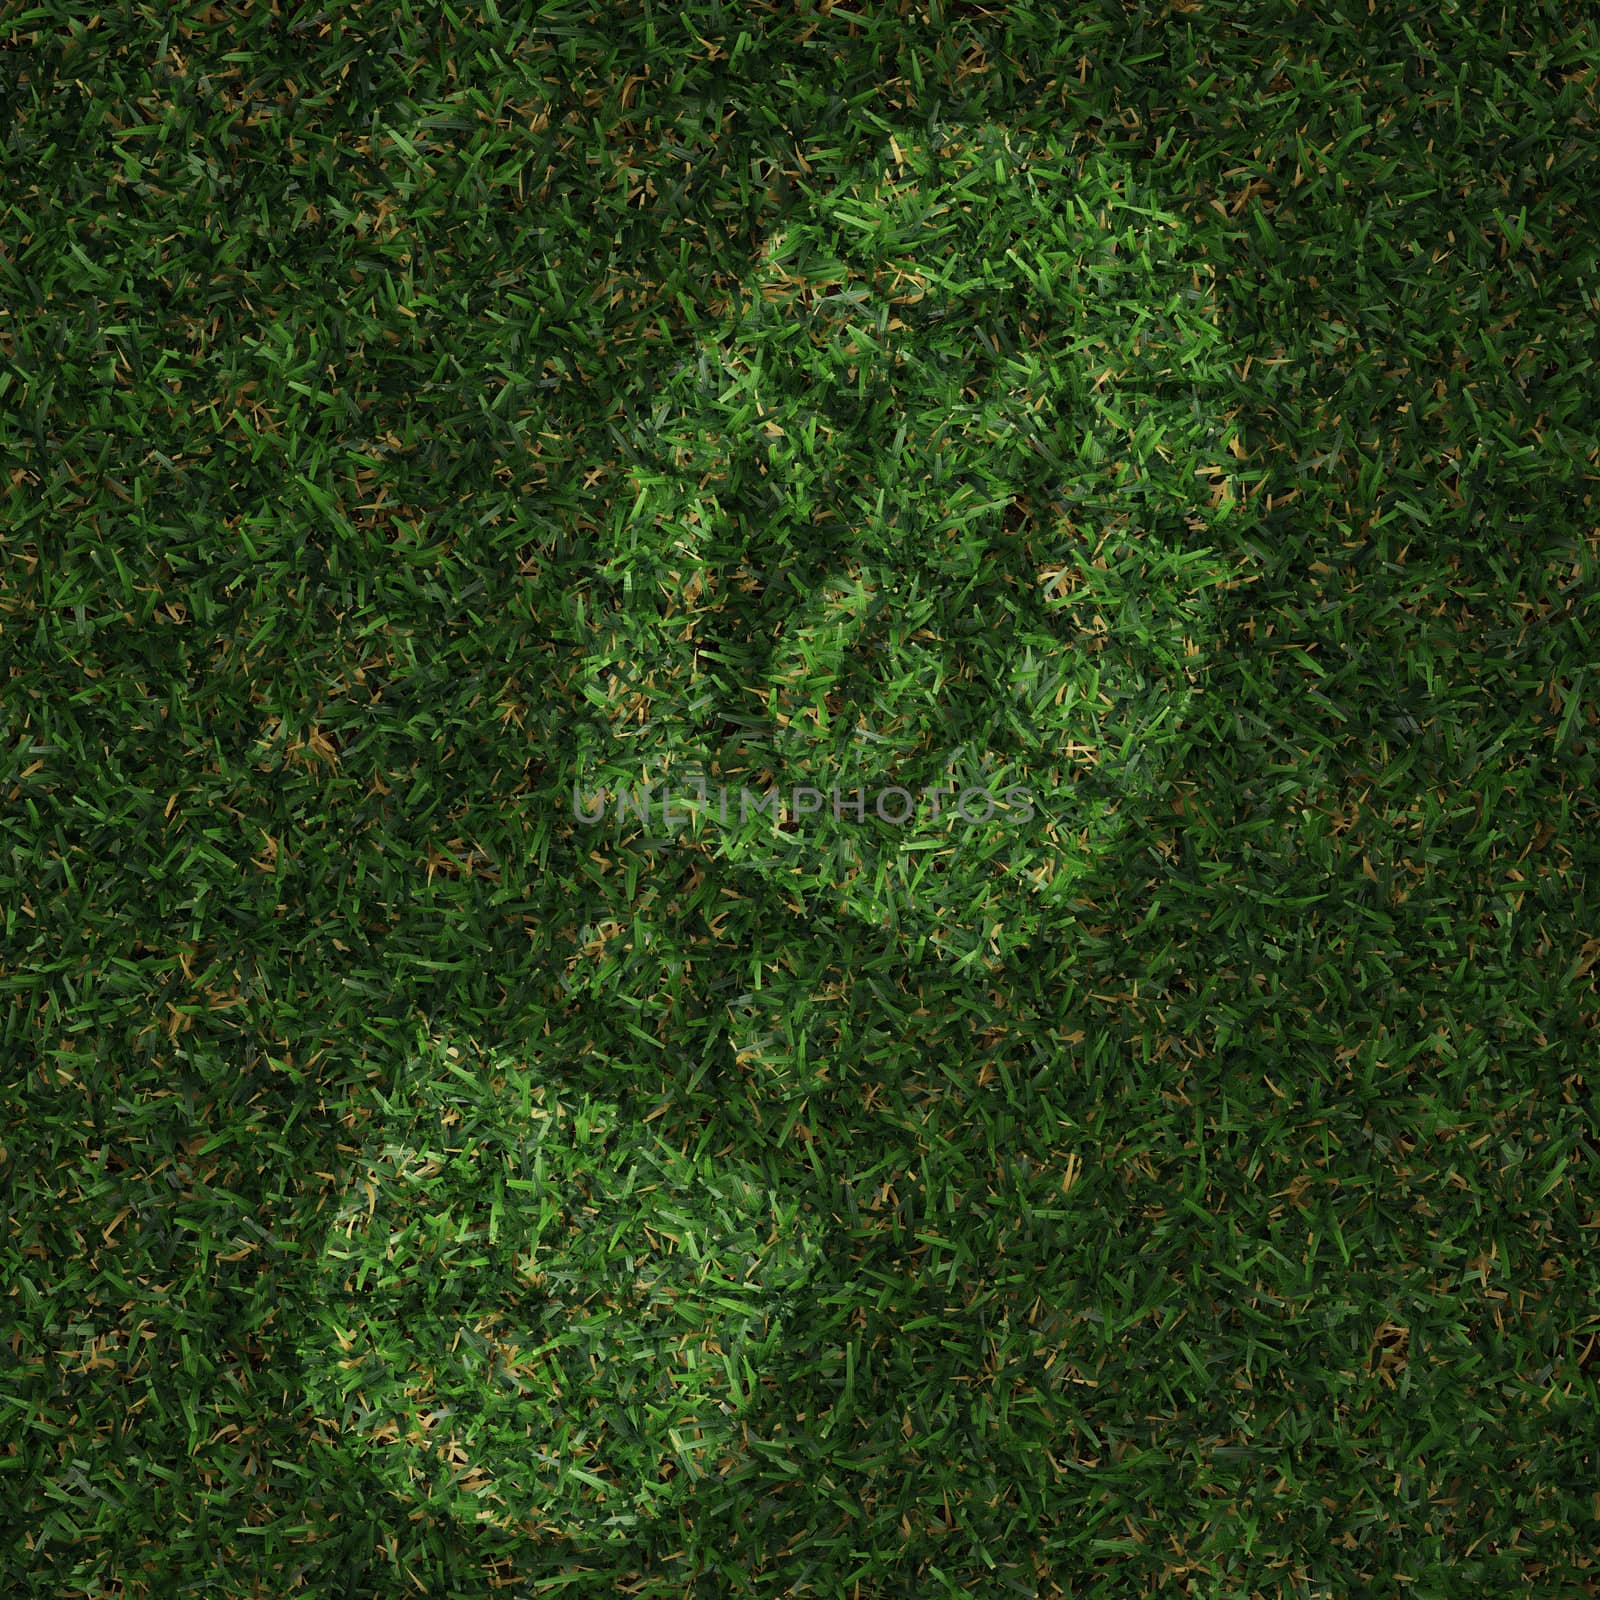 foot print made in grass